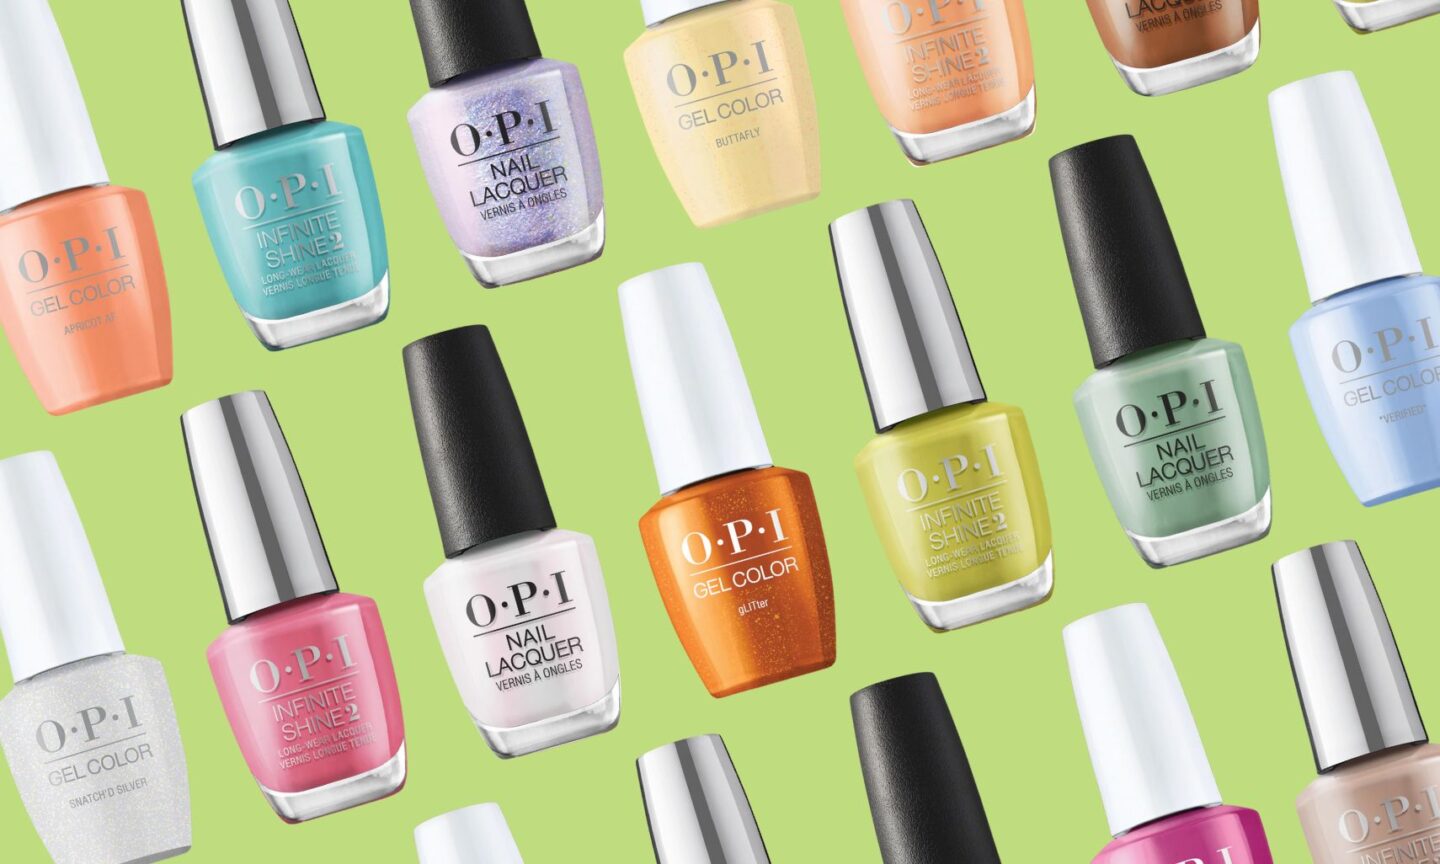 OPI bottles from OPI Your Way collection